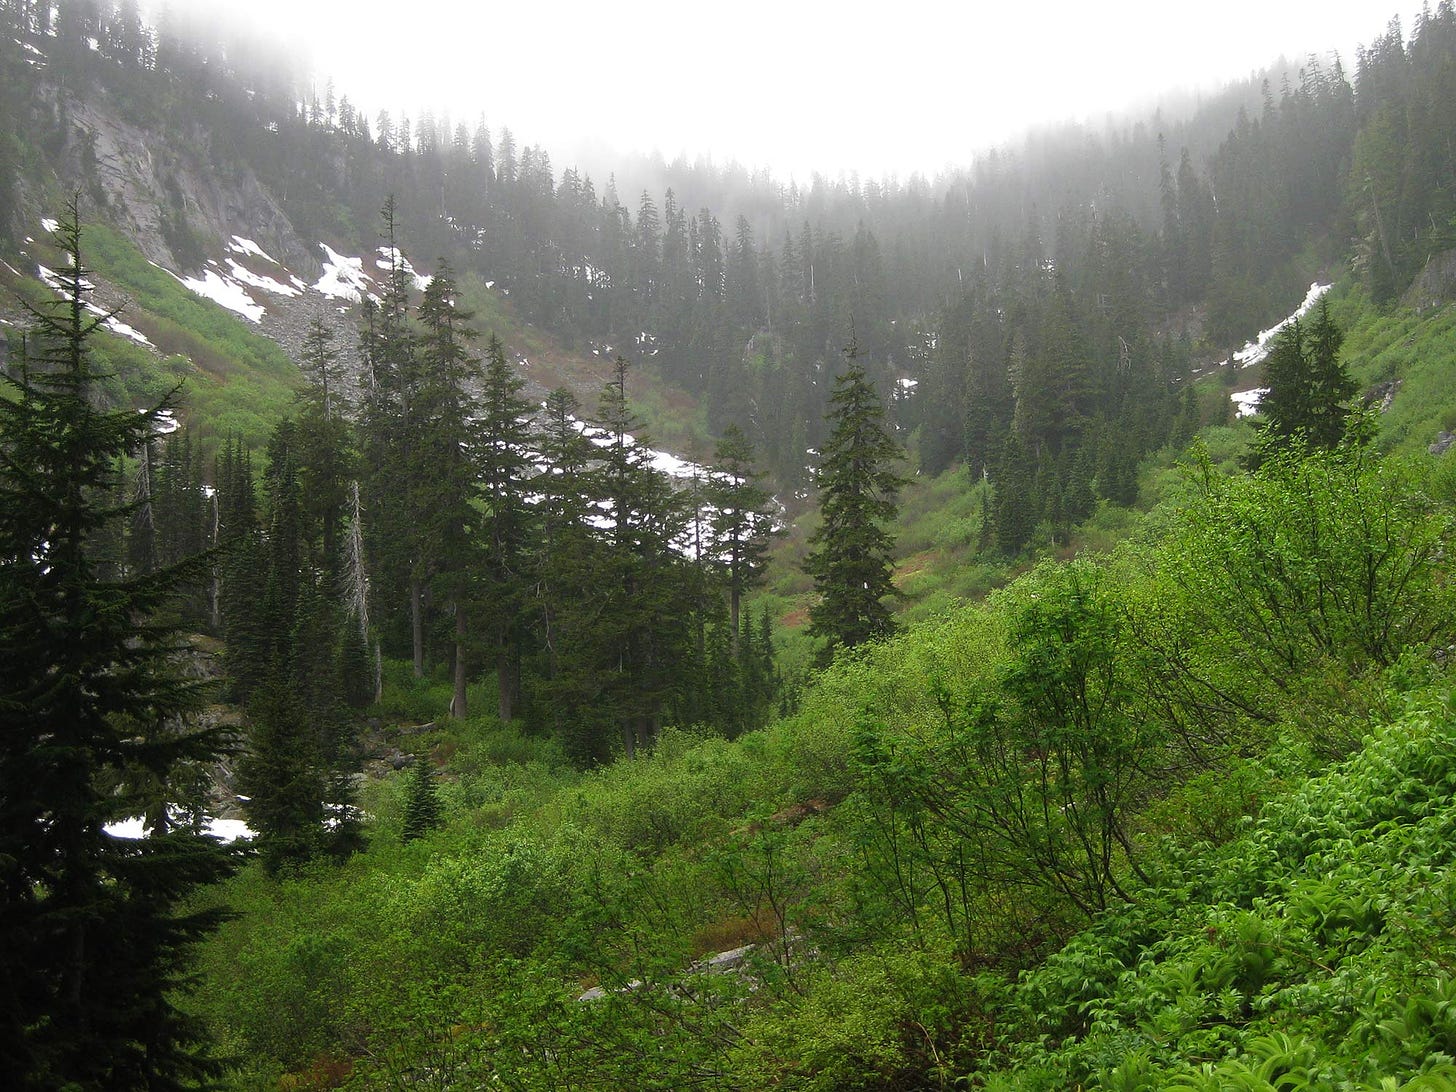 misty high altitude basin lush with bright greenery and stands of dark conifers, streaked by a talus field still spotted with patches of snow - the distant tree-covered pass begins to disappear into the mist